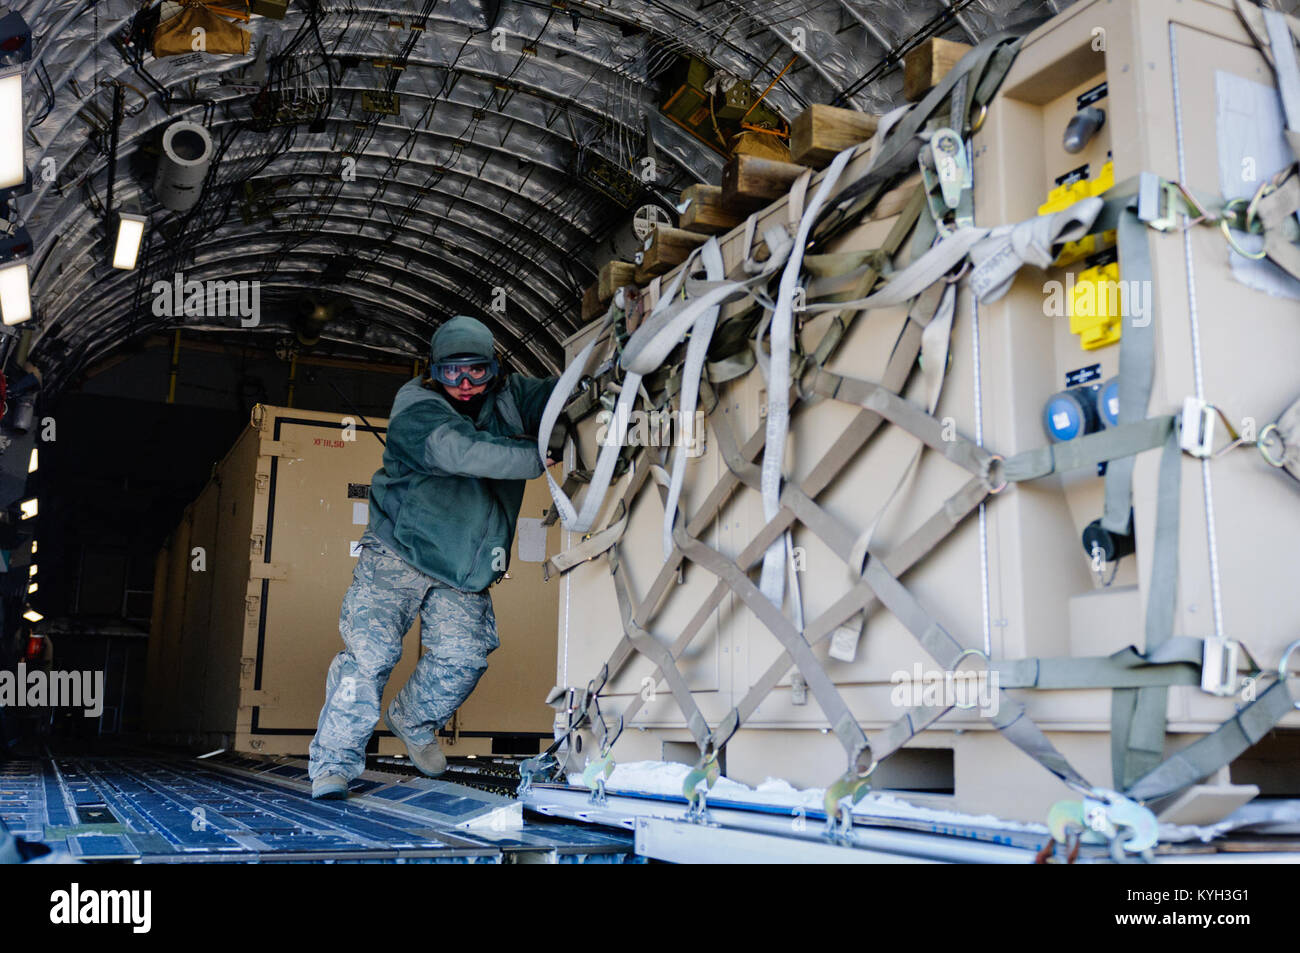 Staff Sgt. Brian Leach, aerial port ramp supervisor for the Kentucky Air National Guard’s 123rd Contingency Response Group, pushes a pallet of cargo from a C-17 during Exercise Eagle Flag at Joint Base McGuire-Dix-Lakehurst, N.J., on March 28, 2012. The unit, from Louisville, Ky., joined forces with the U.S. Army’s 690th Rapid Port Opening Element from Fort Eustis, Va., to establish a Joint Task Force-Port Opening through March 30. (U.S. Air Force photo by Master Sgt. Phil Speck) Stock Photo